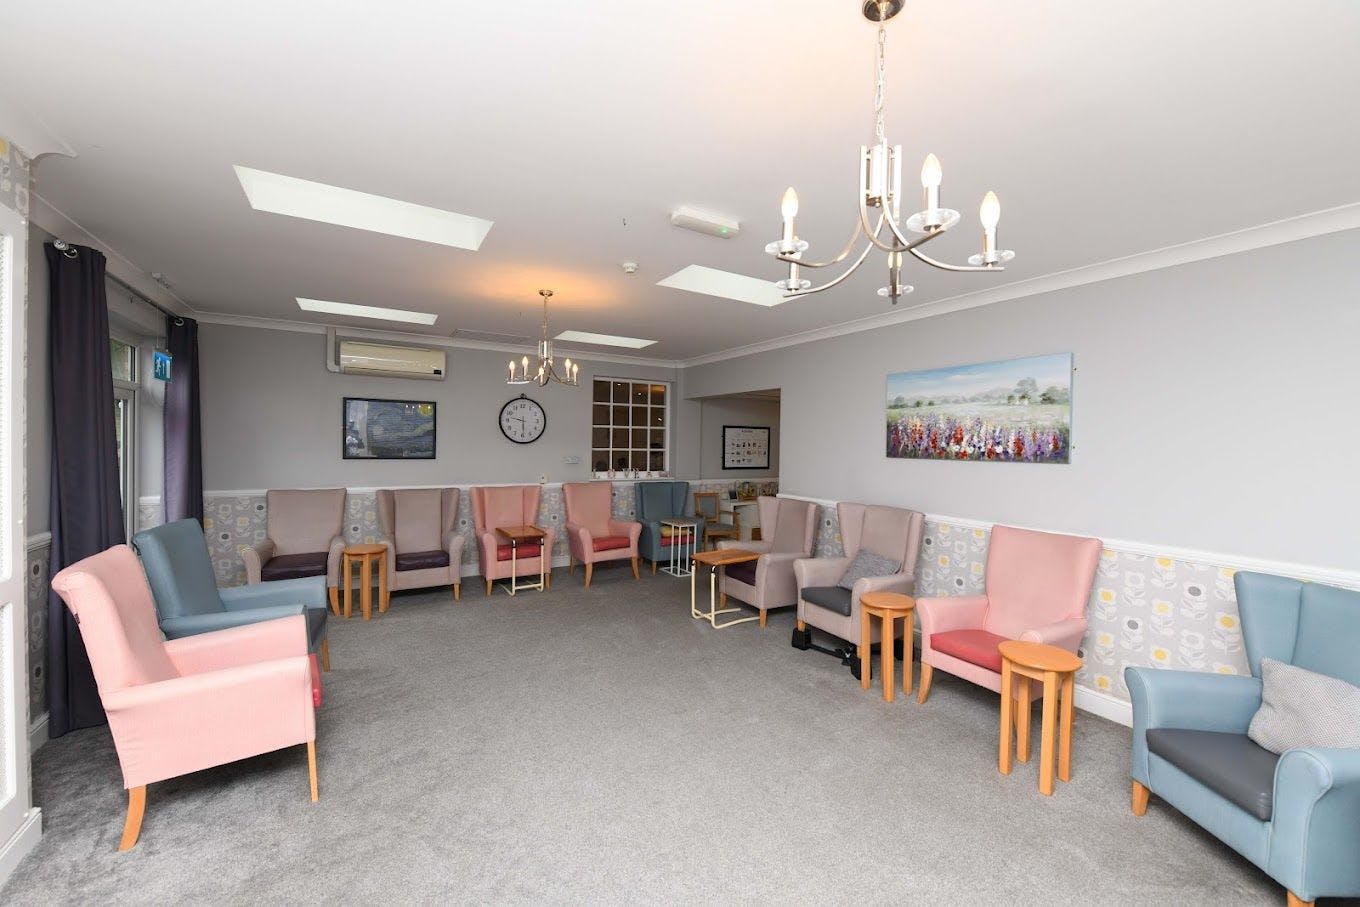 Woodbury Manor care home in Enfield 8